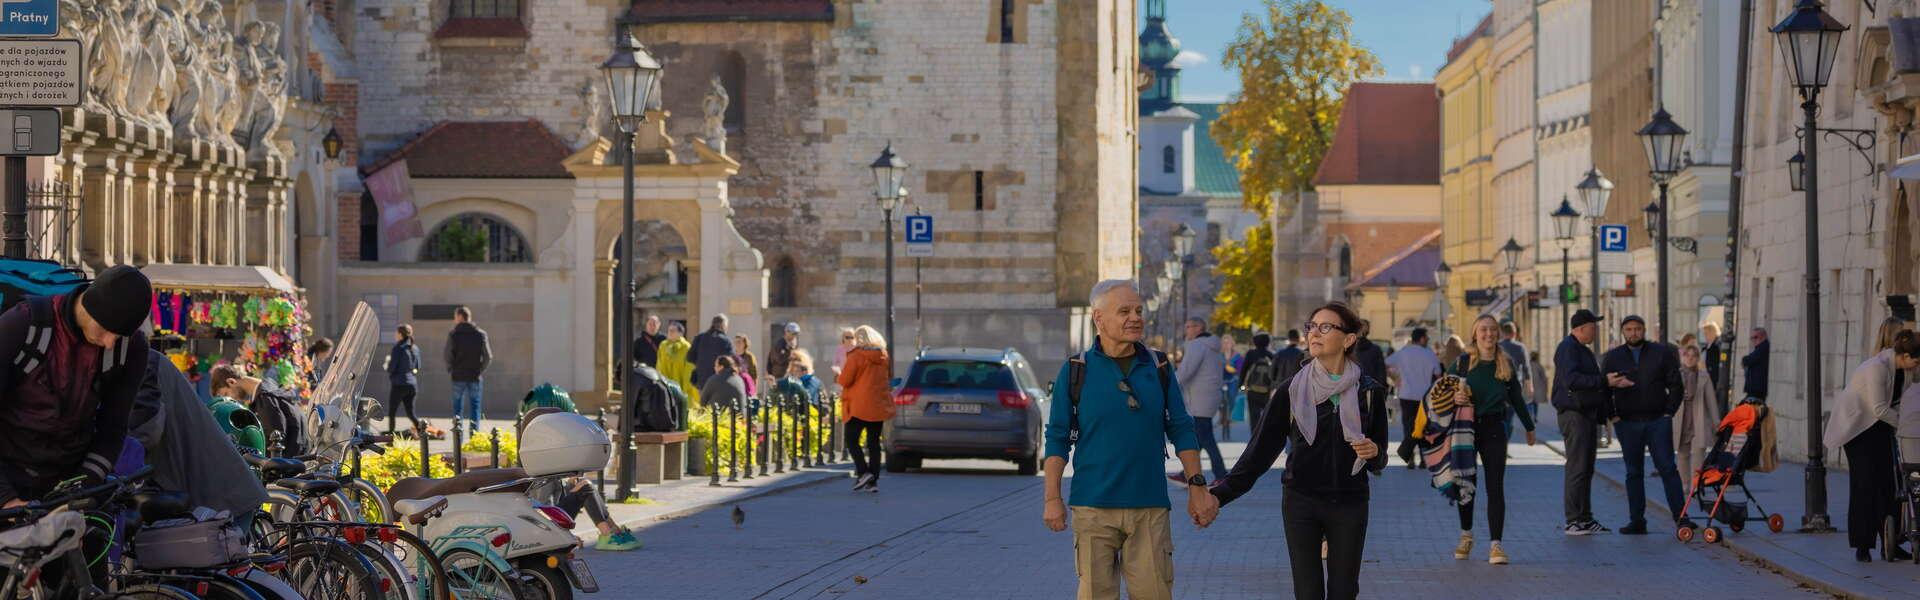 Image: Kraków for senior citizens Attractions and places to visit